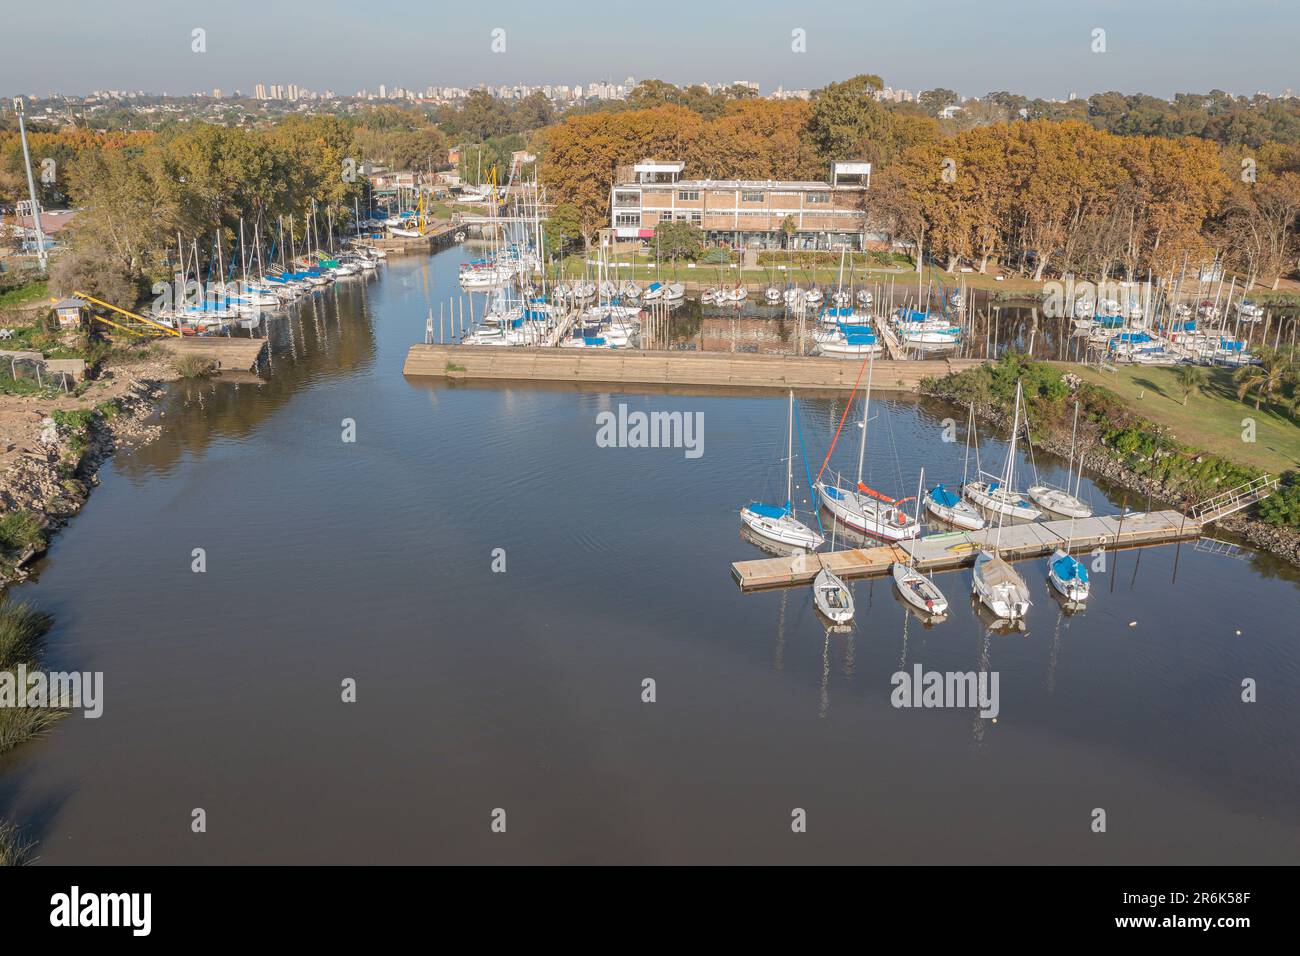 Sailboats docked at a pier on the coast of the Rio de la Plata in the city of Quilmes. Stock Photo